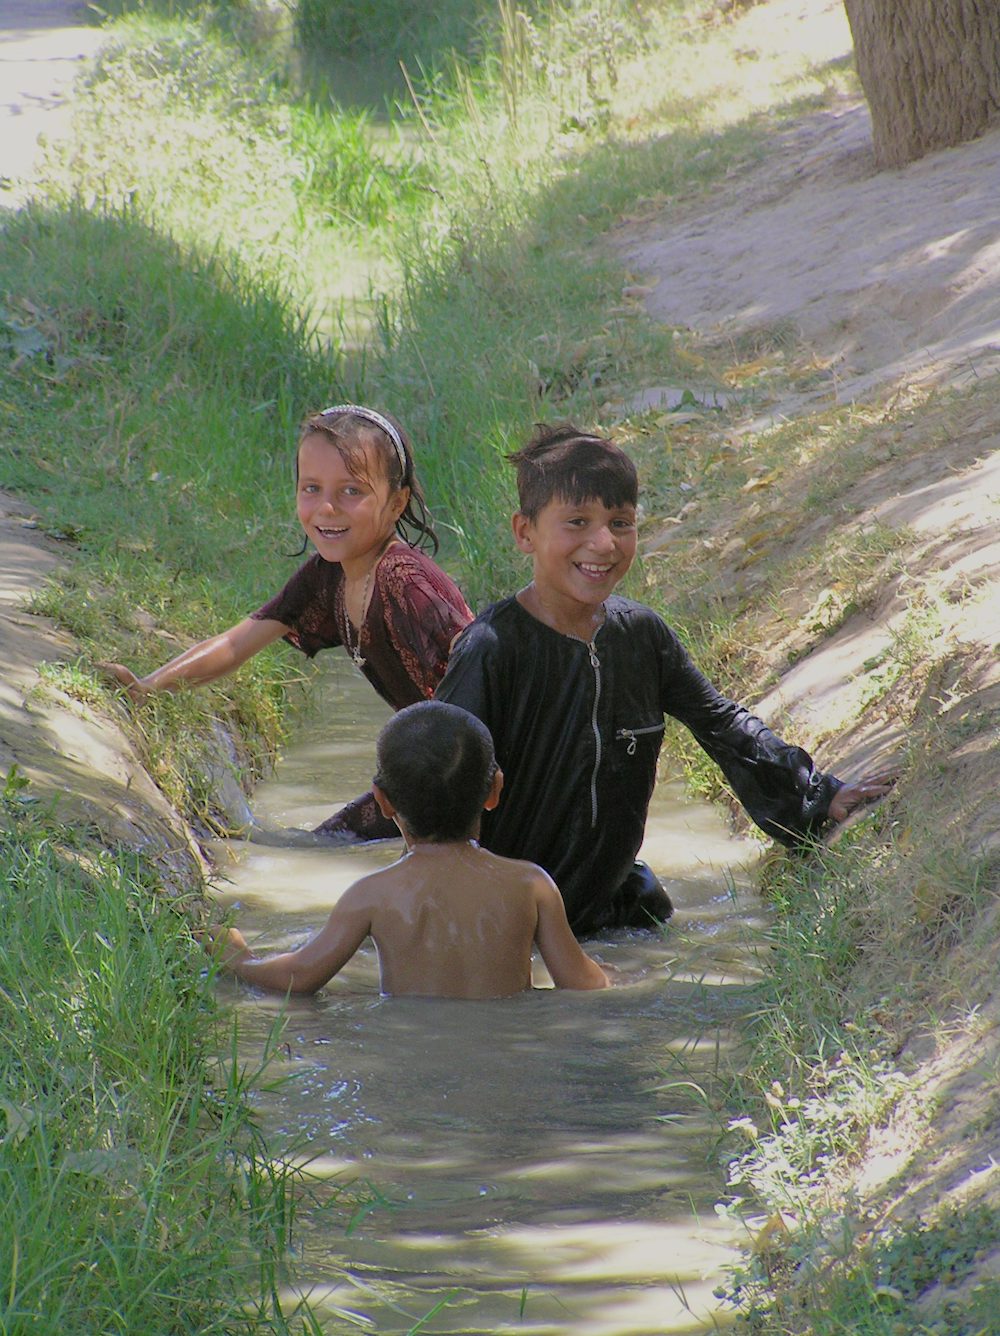 Children frolic and cool off in an irrigation canal on a blistering hot day in Balkh Province in a village outside of Mazar e Sharif.